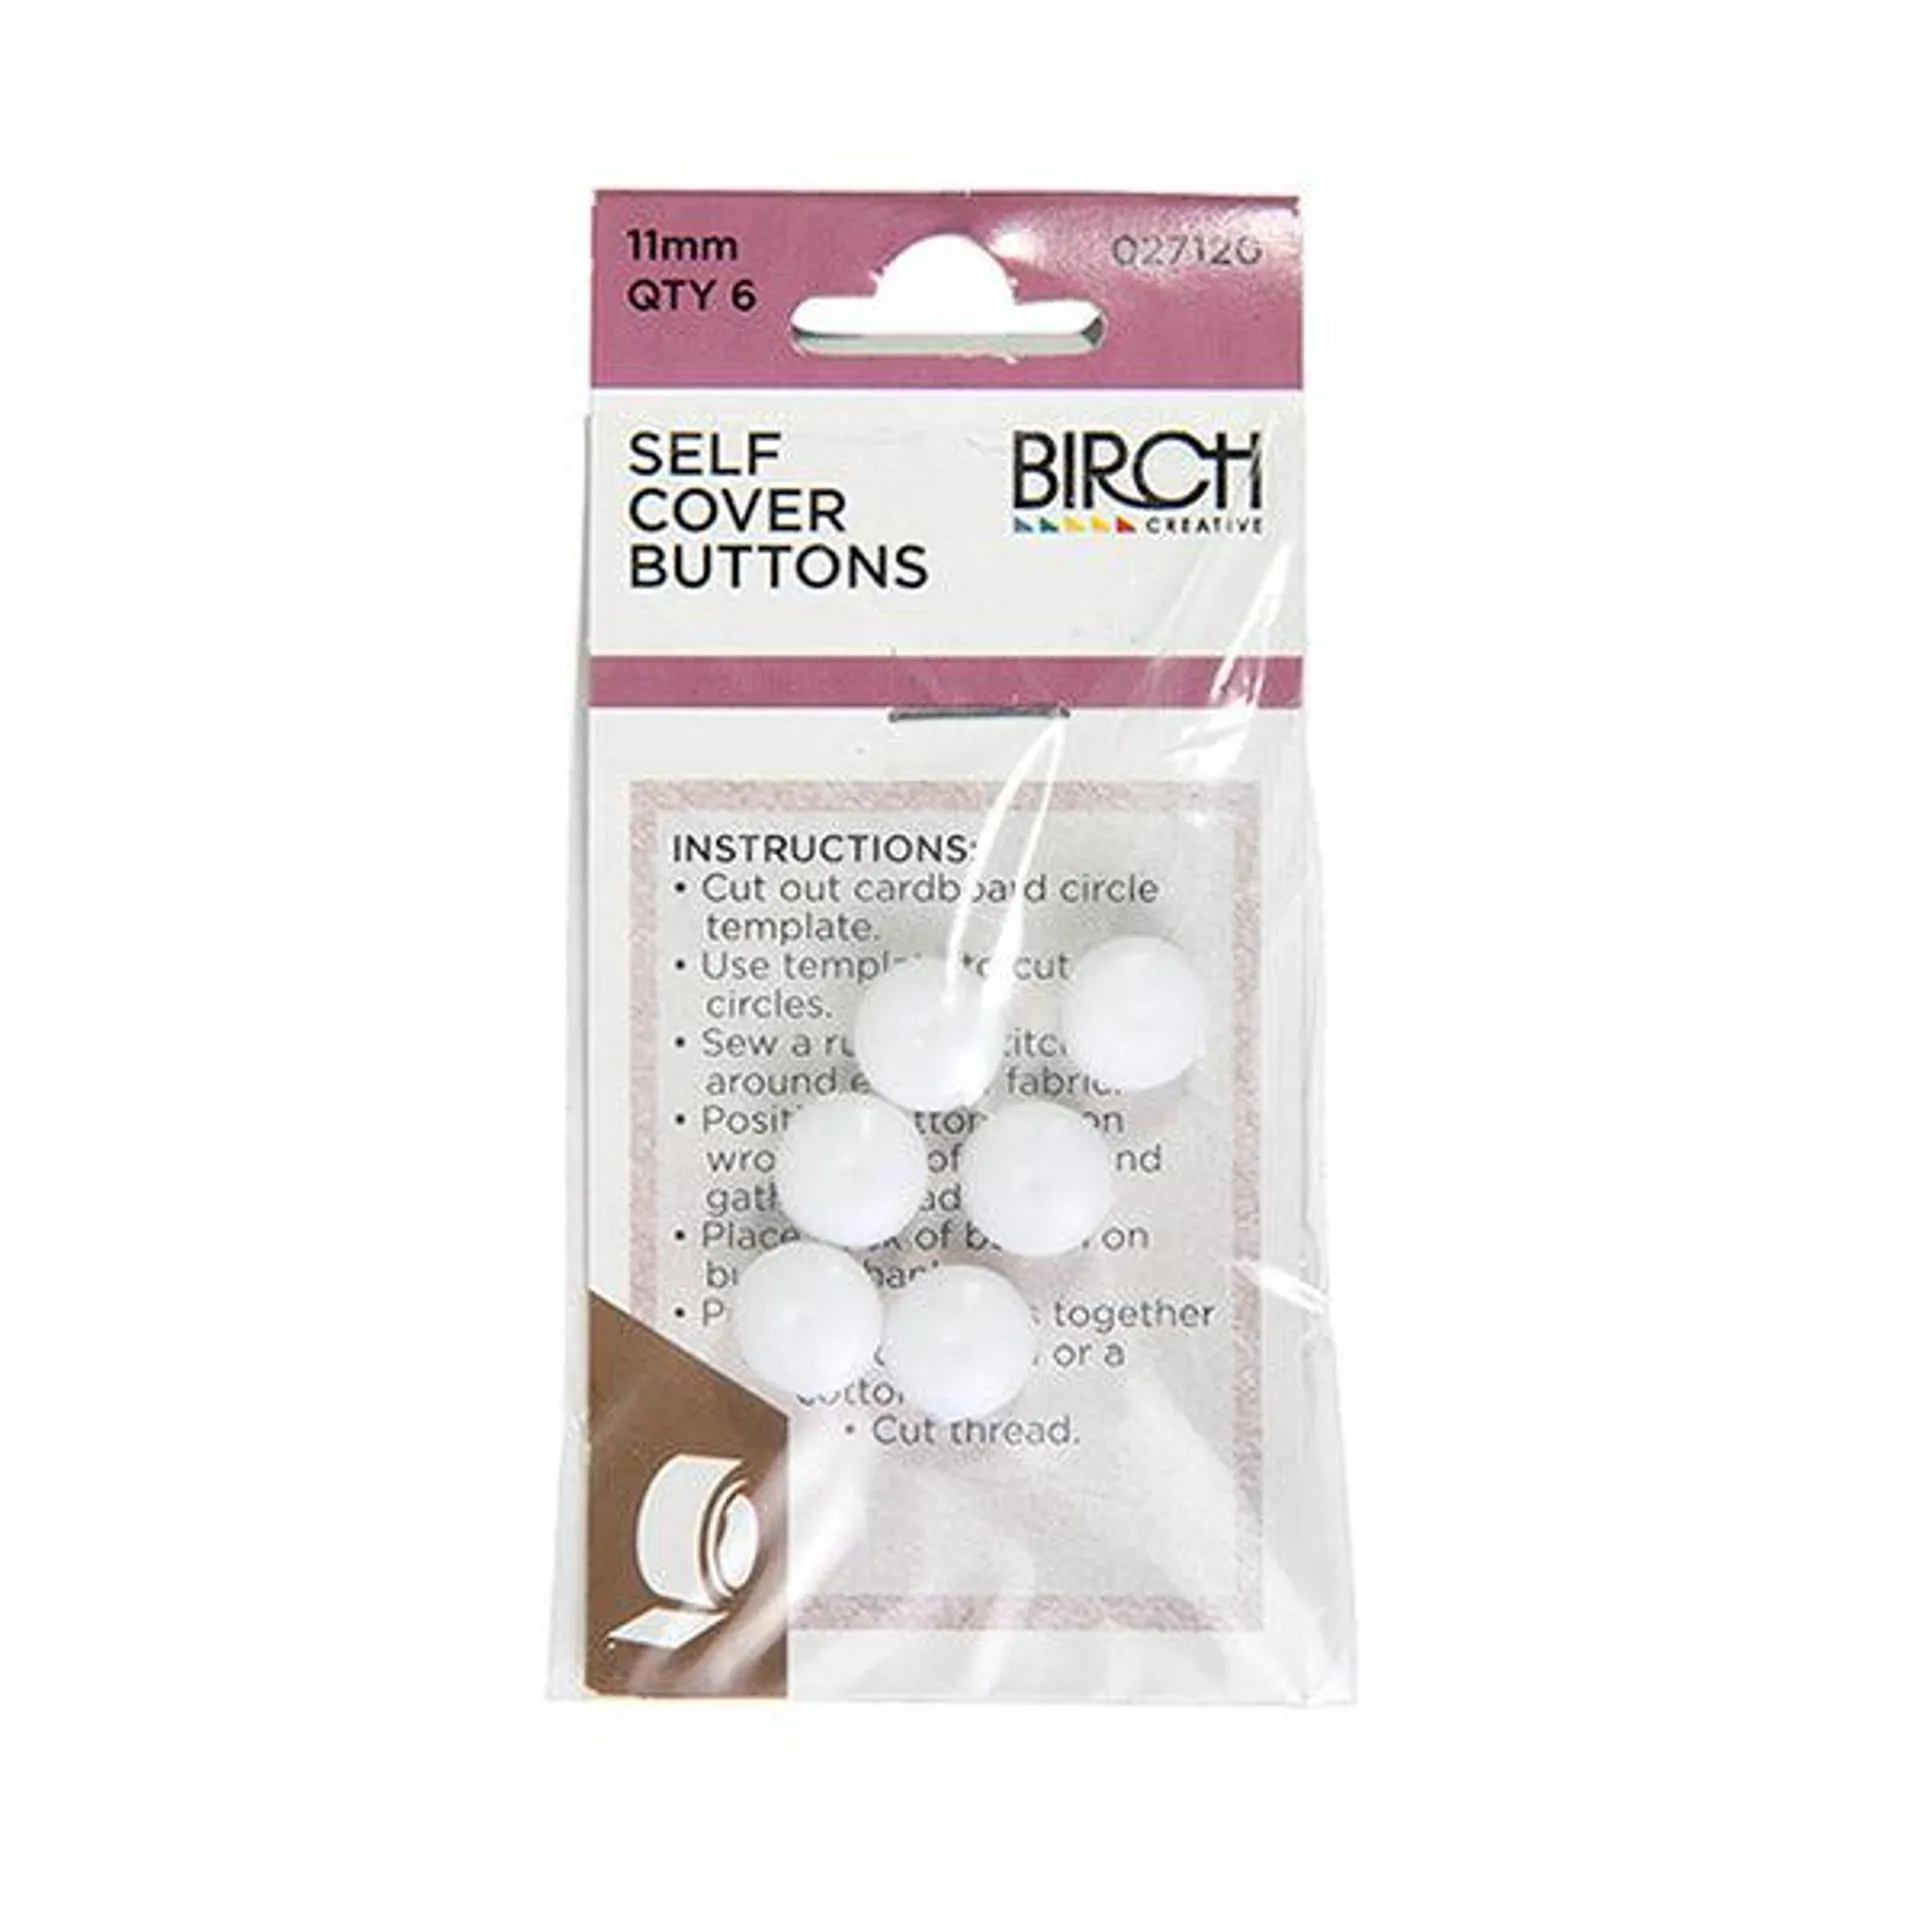 Birch Self Cover Buttons 6 Pack- 11mm